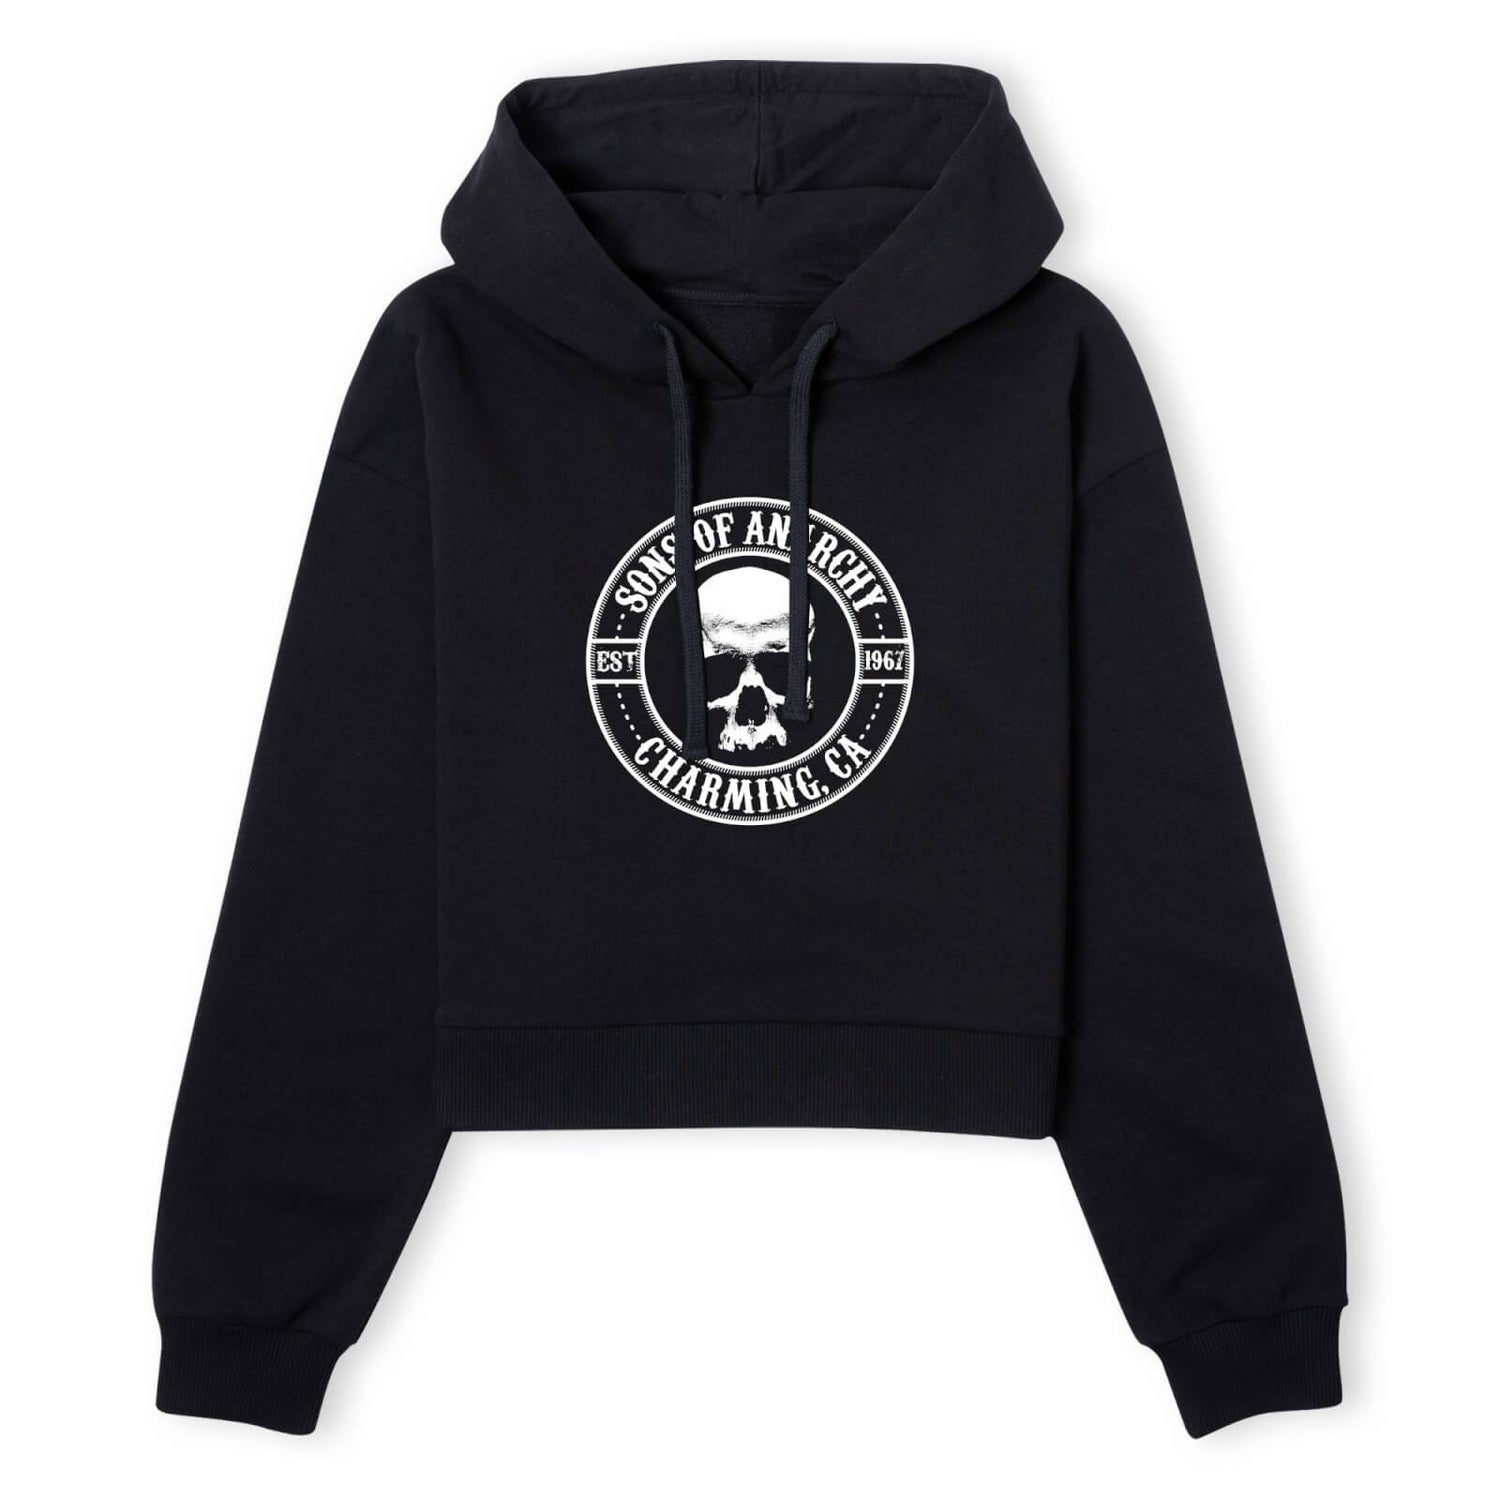 Sons of Anarchy Charming CA Women's Cropped Hoodie - Black